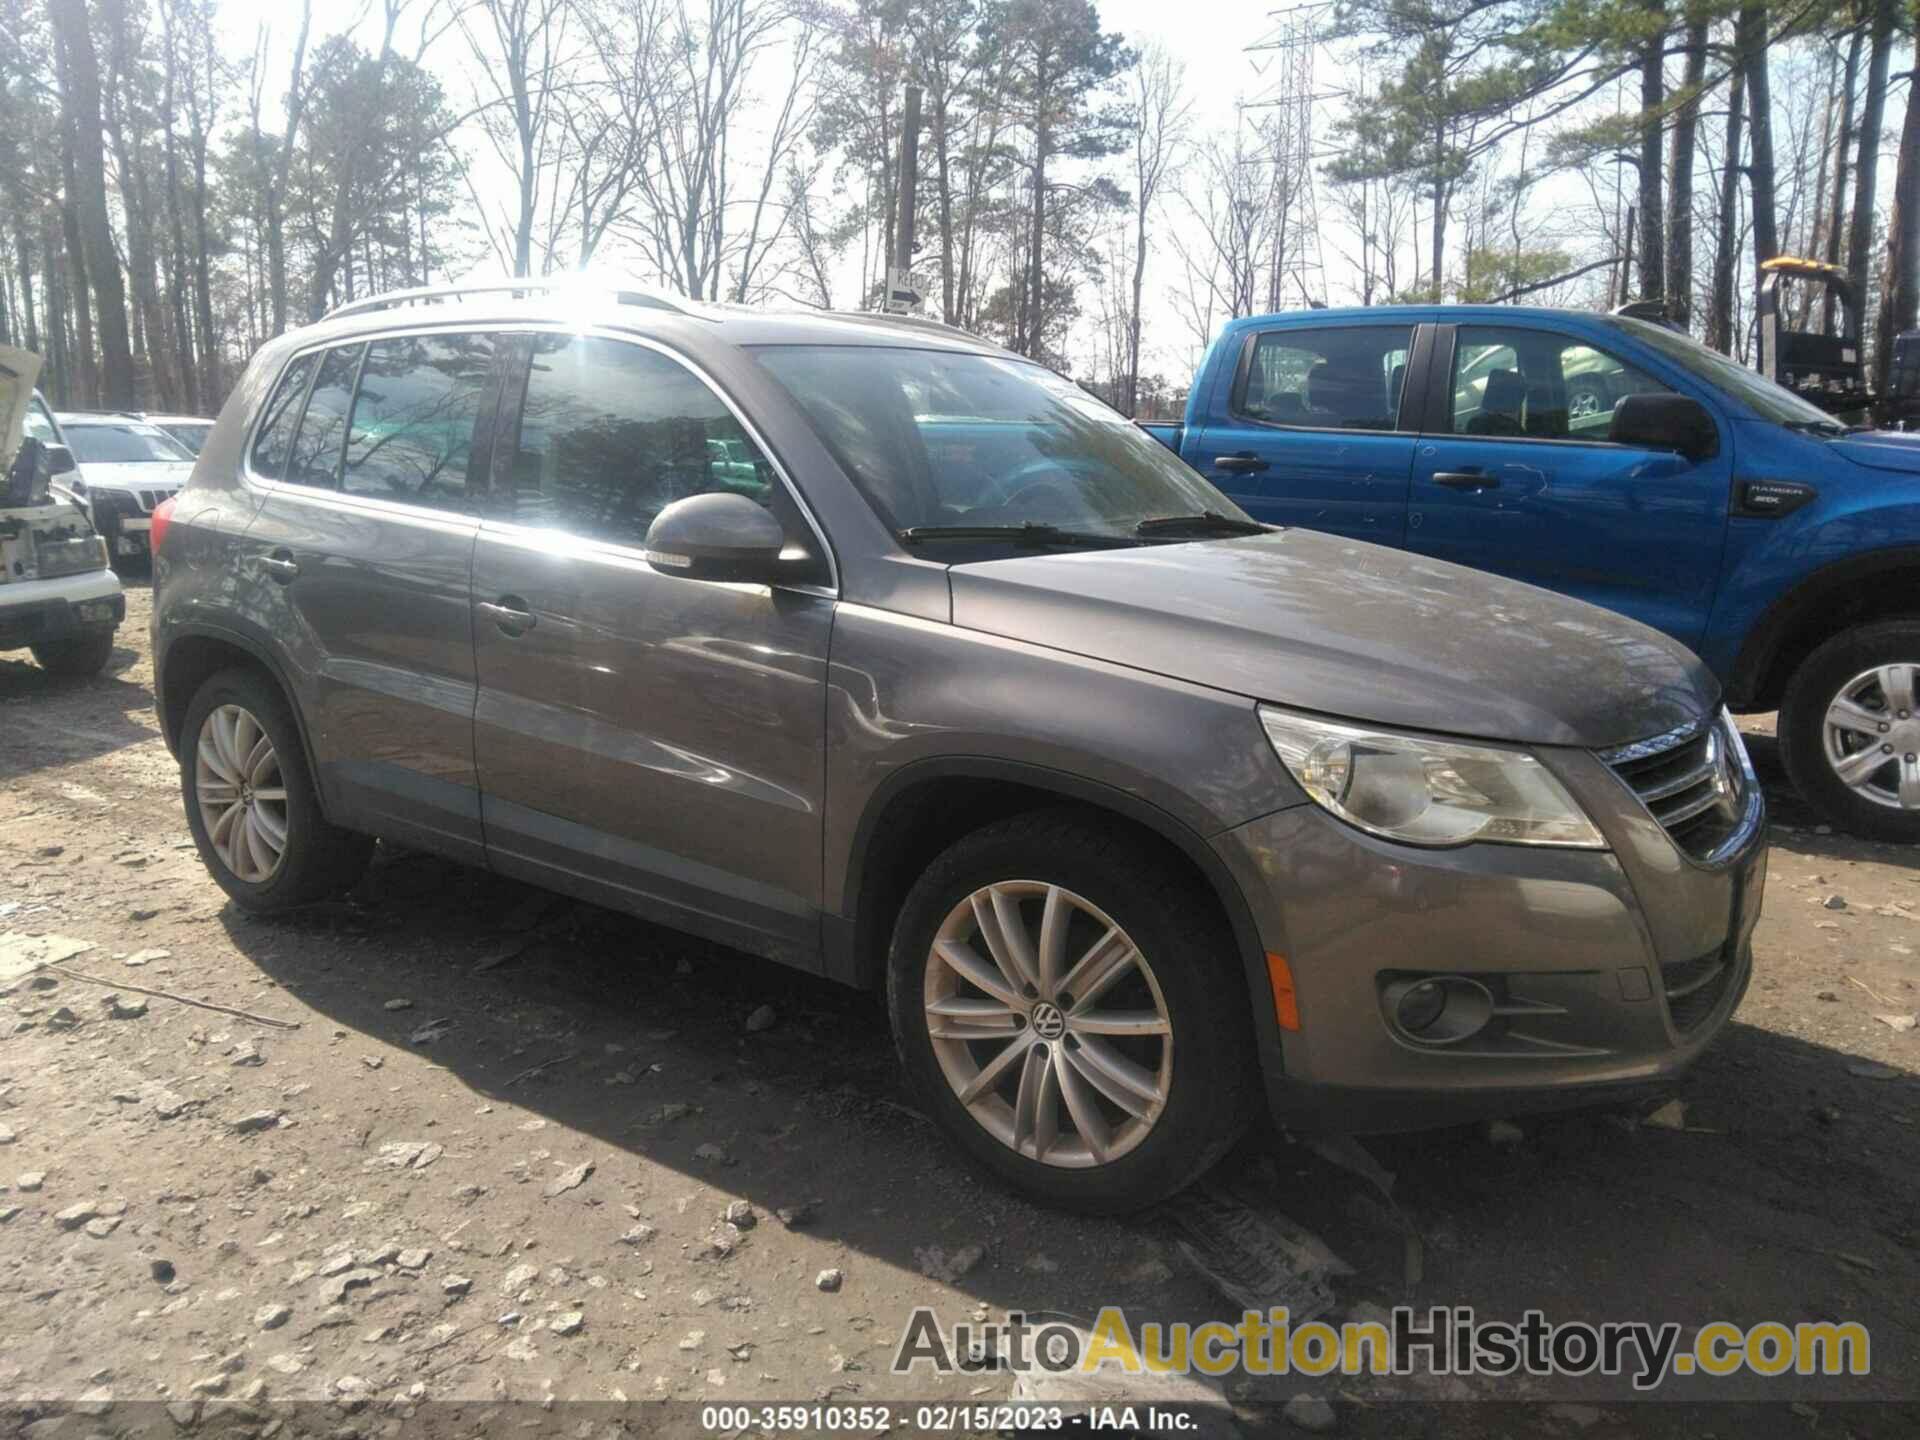 VOLKSWAGEN TIGUAN SE 4MOTION WSUNROOF &, WVGBV7AX4BW542423